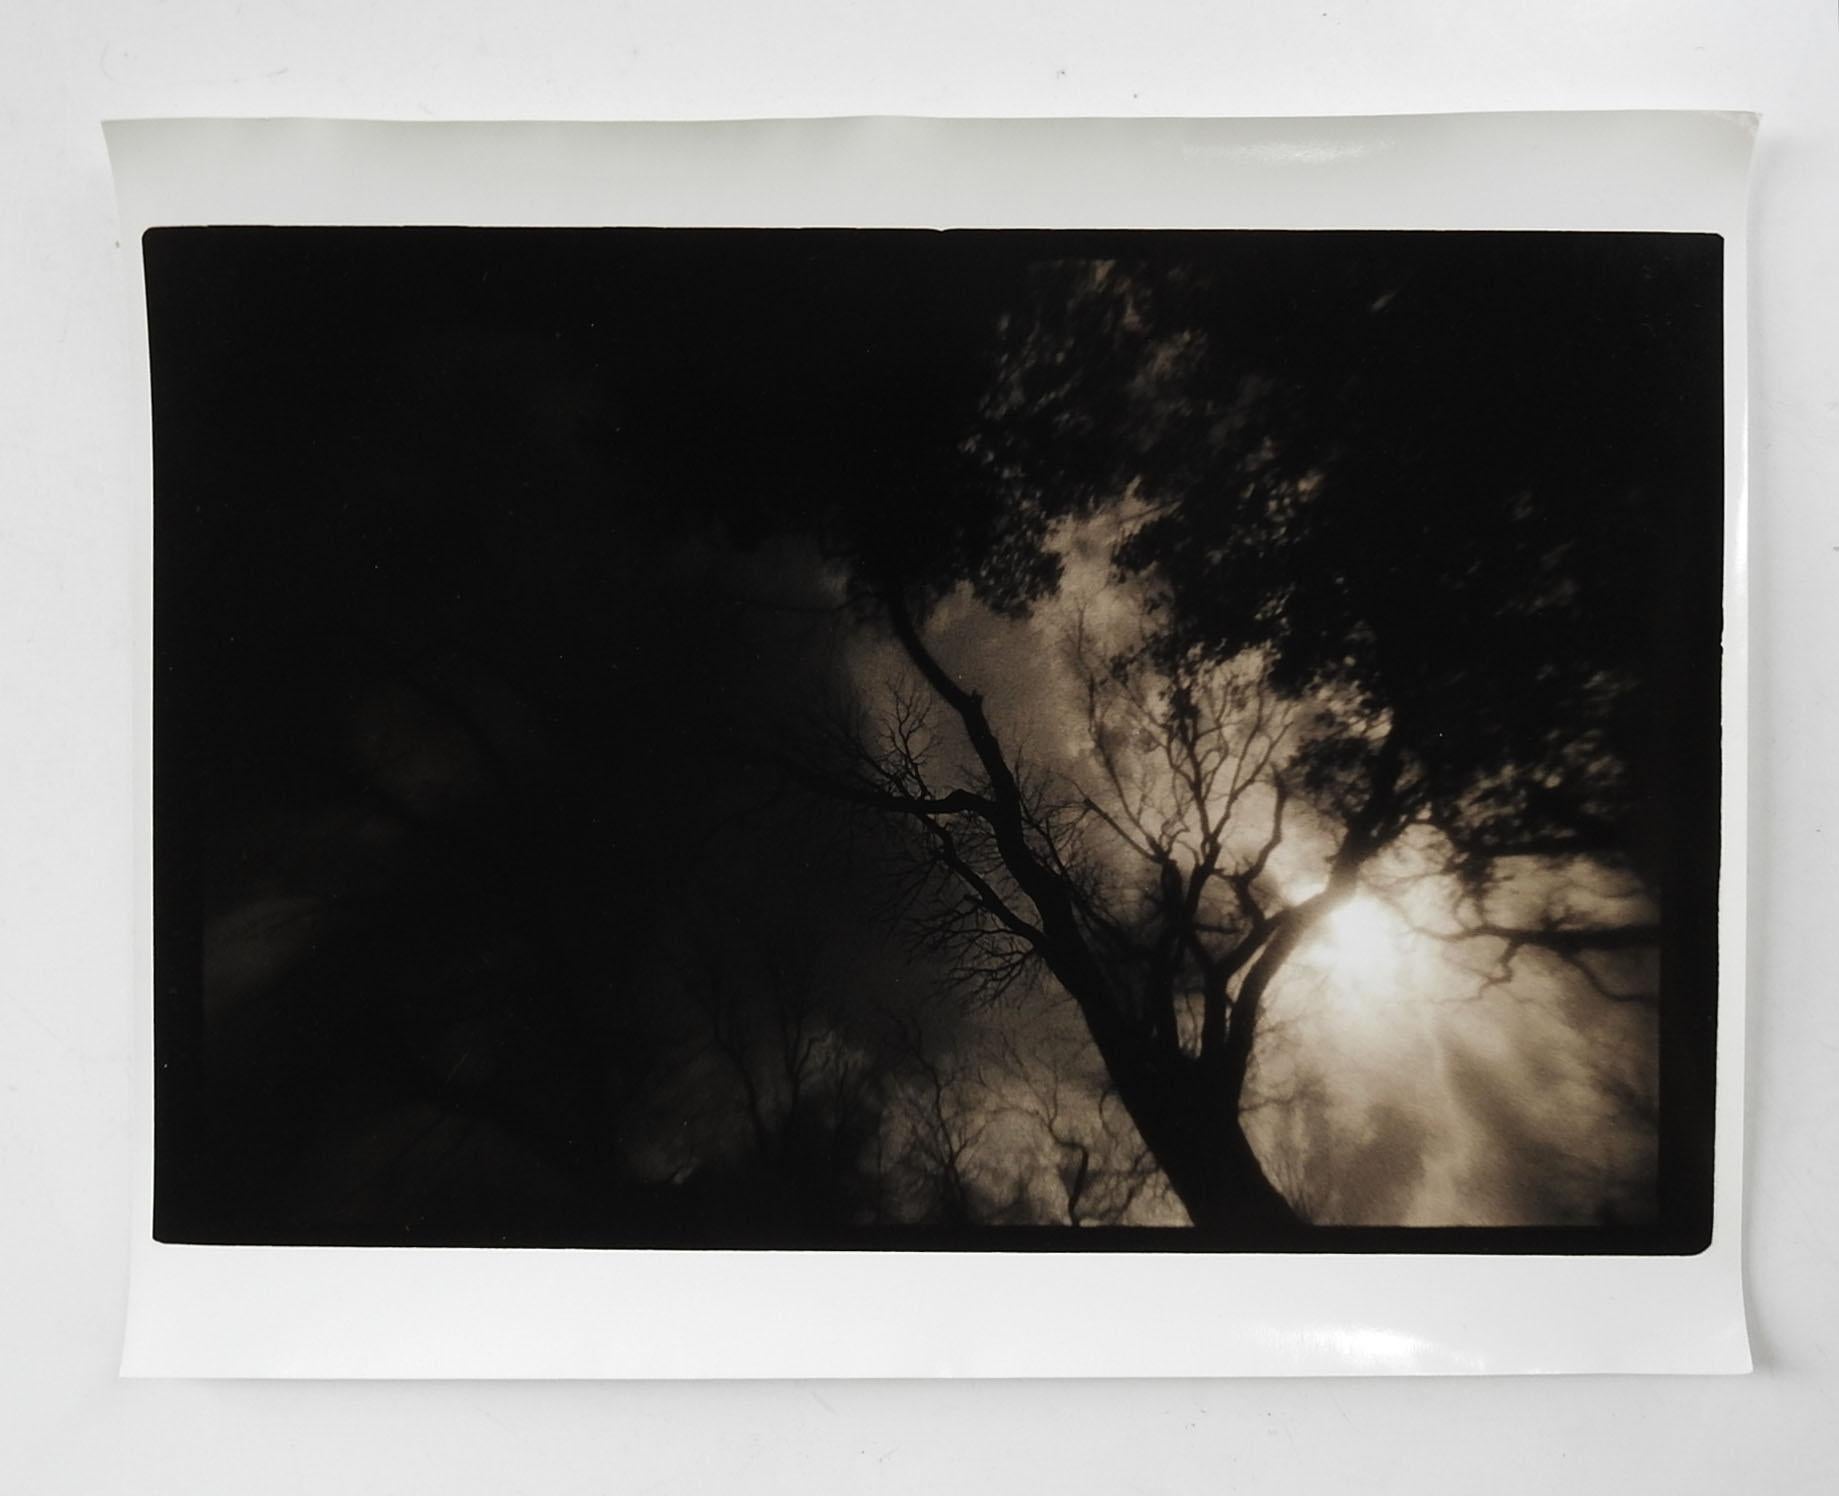 Vintage circa 1990's photograph on heavy paper by Eric C. Weller (20th century) Texas. Dark sepia toned semi glossy photograph of sun through tree canopy. Unsigned, Eric Weller was a professor of photography at Texas State University, from the